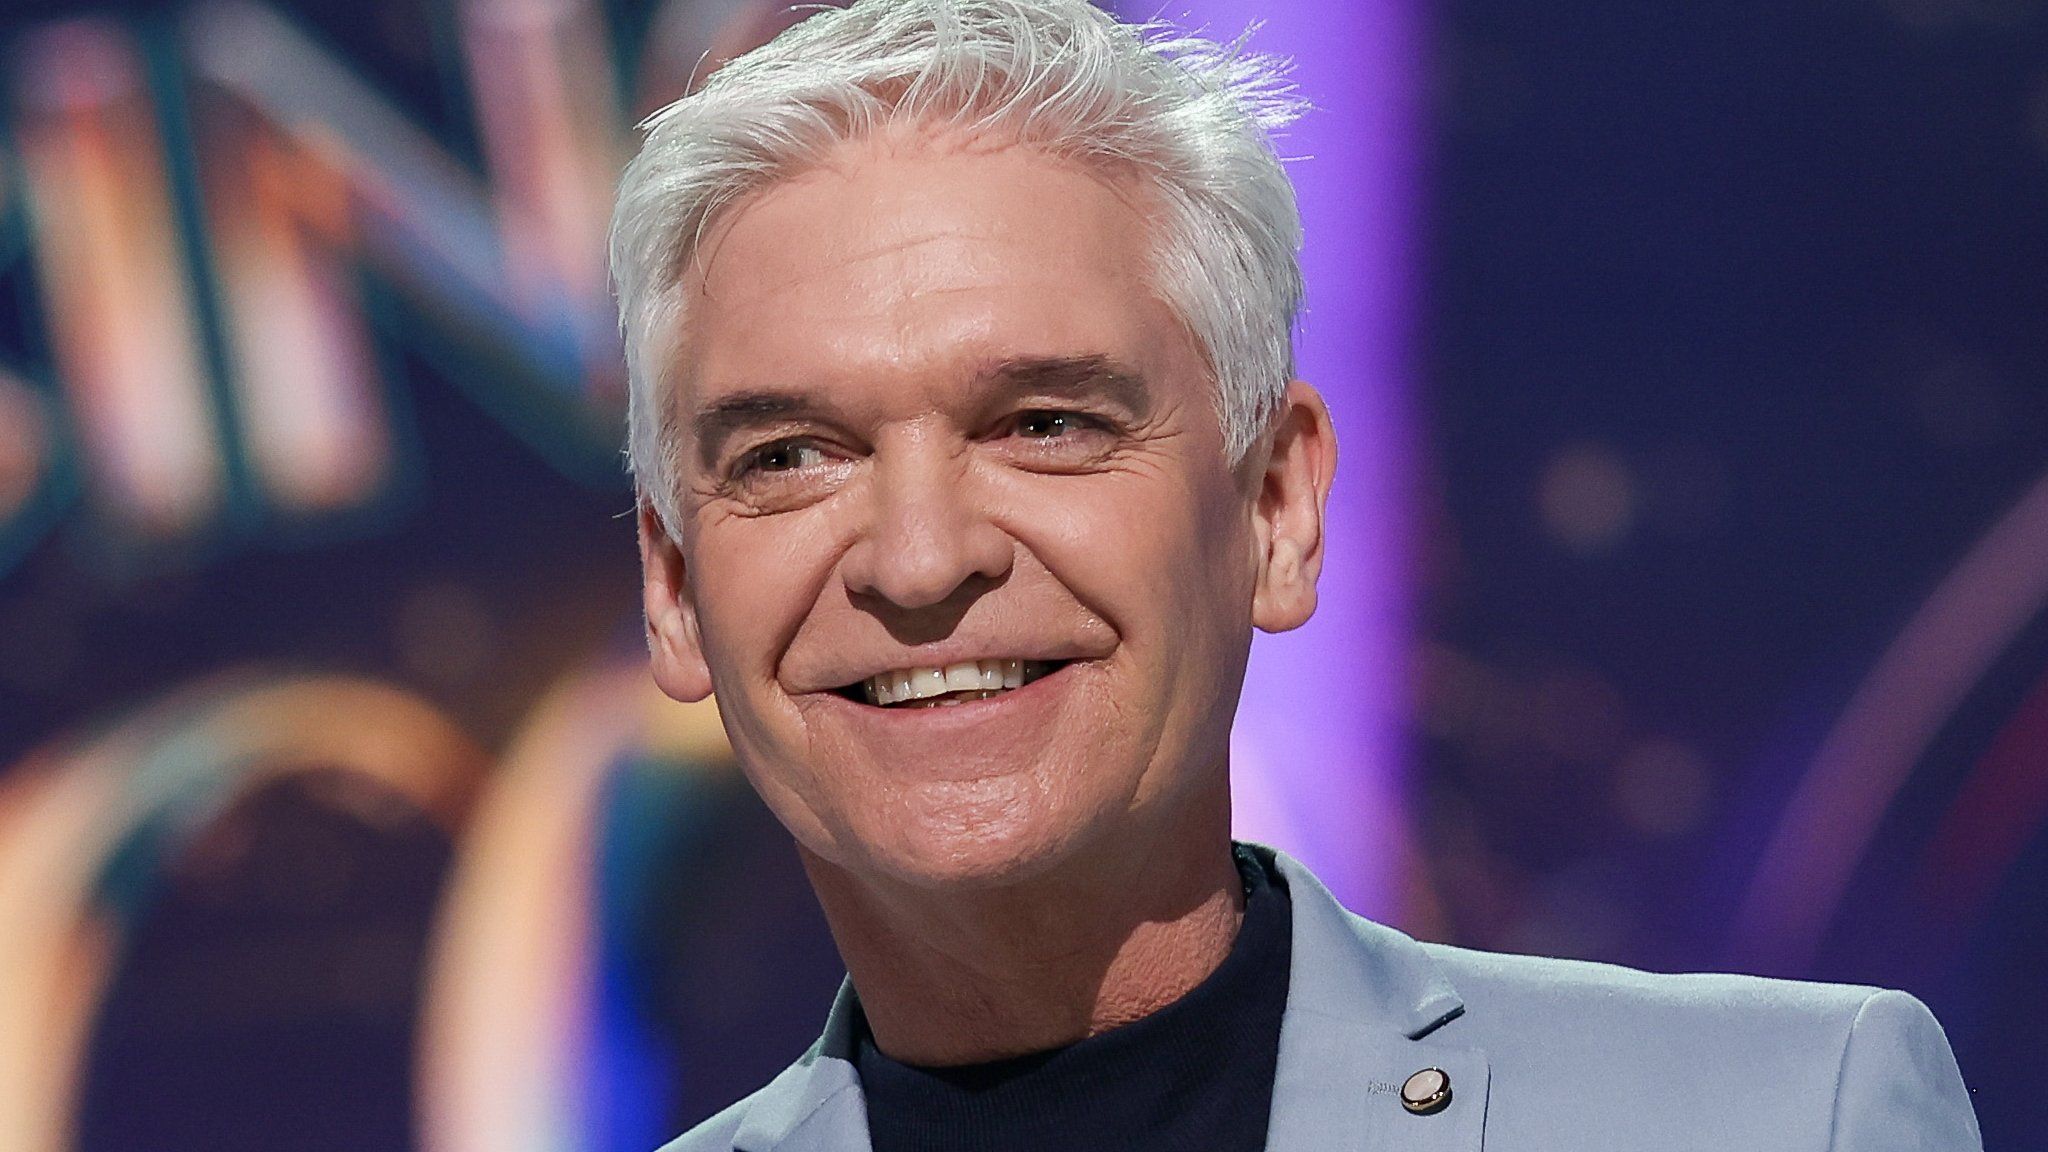 Phillip Schofield attends the "Dancing On Ice" Series 15 Photocall at ITV Studios, Bovingdon on January 11, 2023